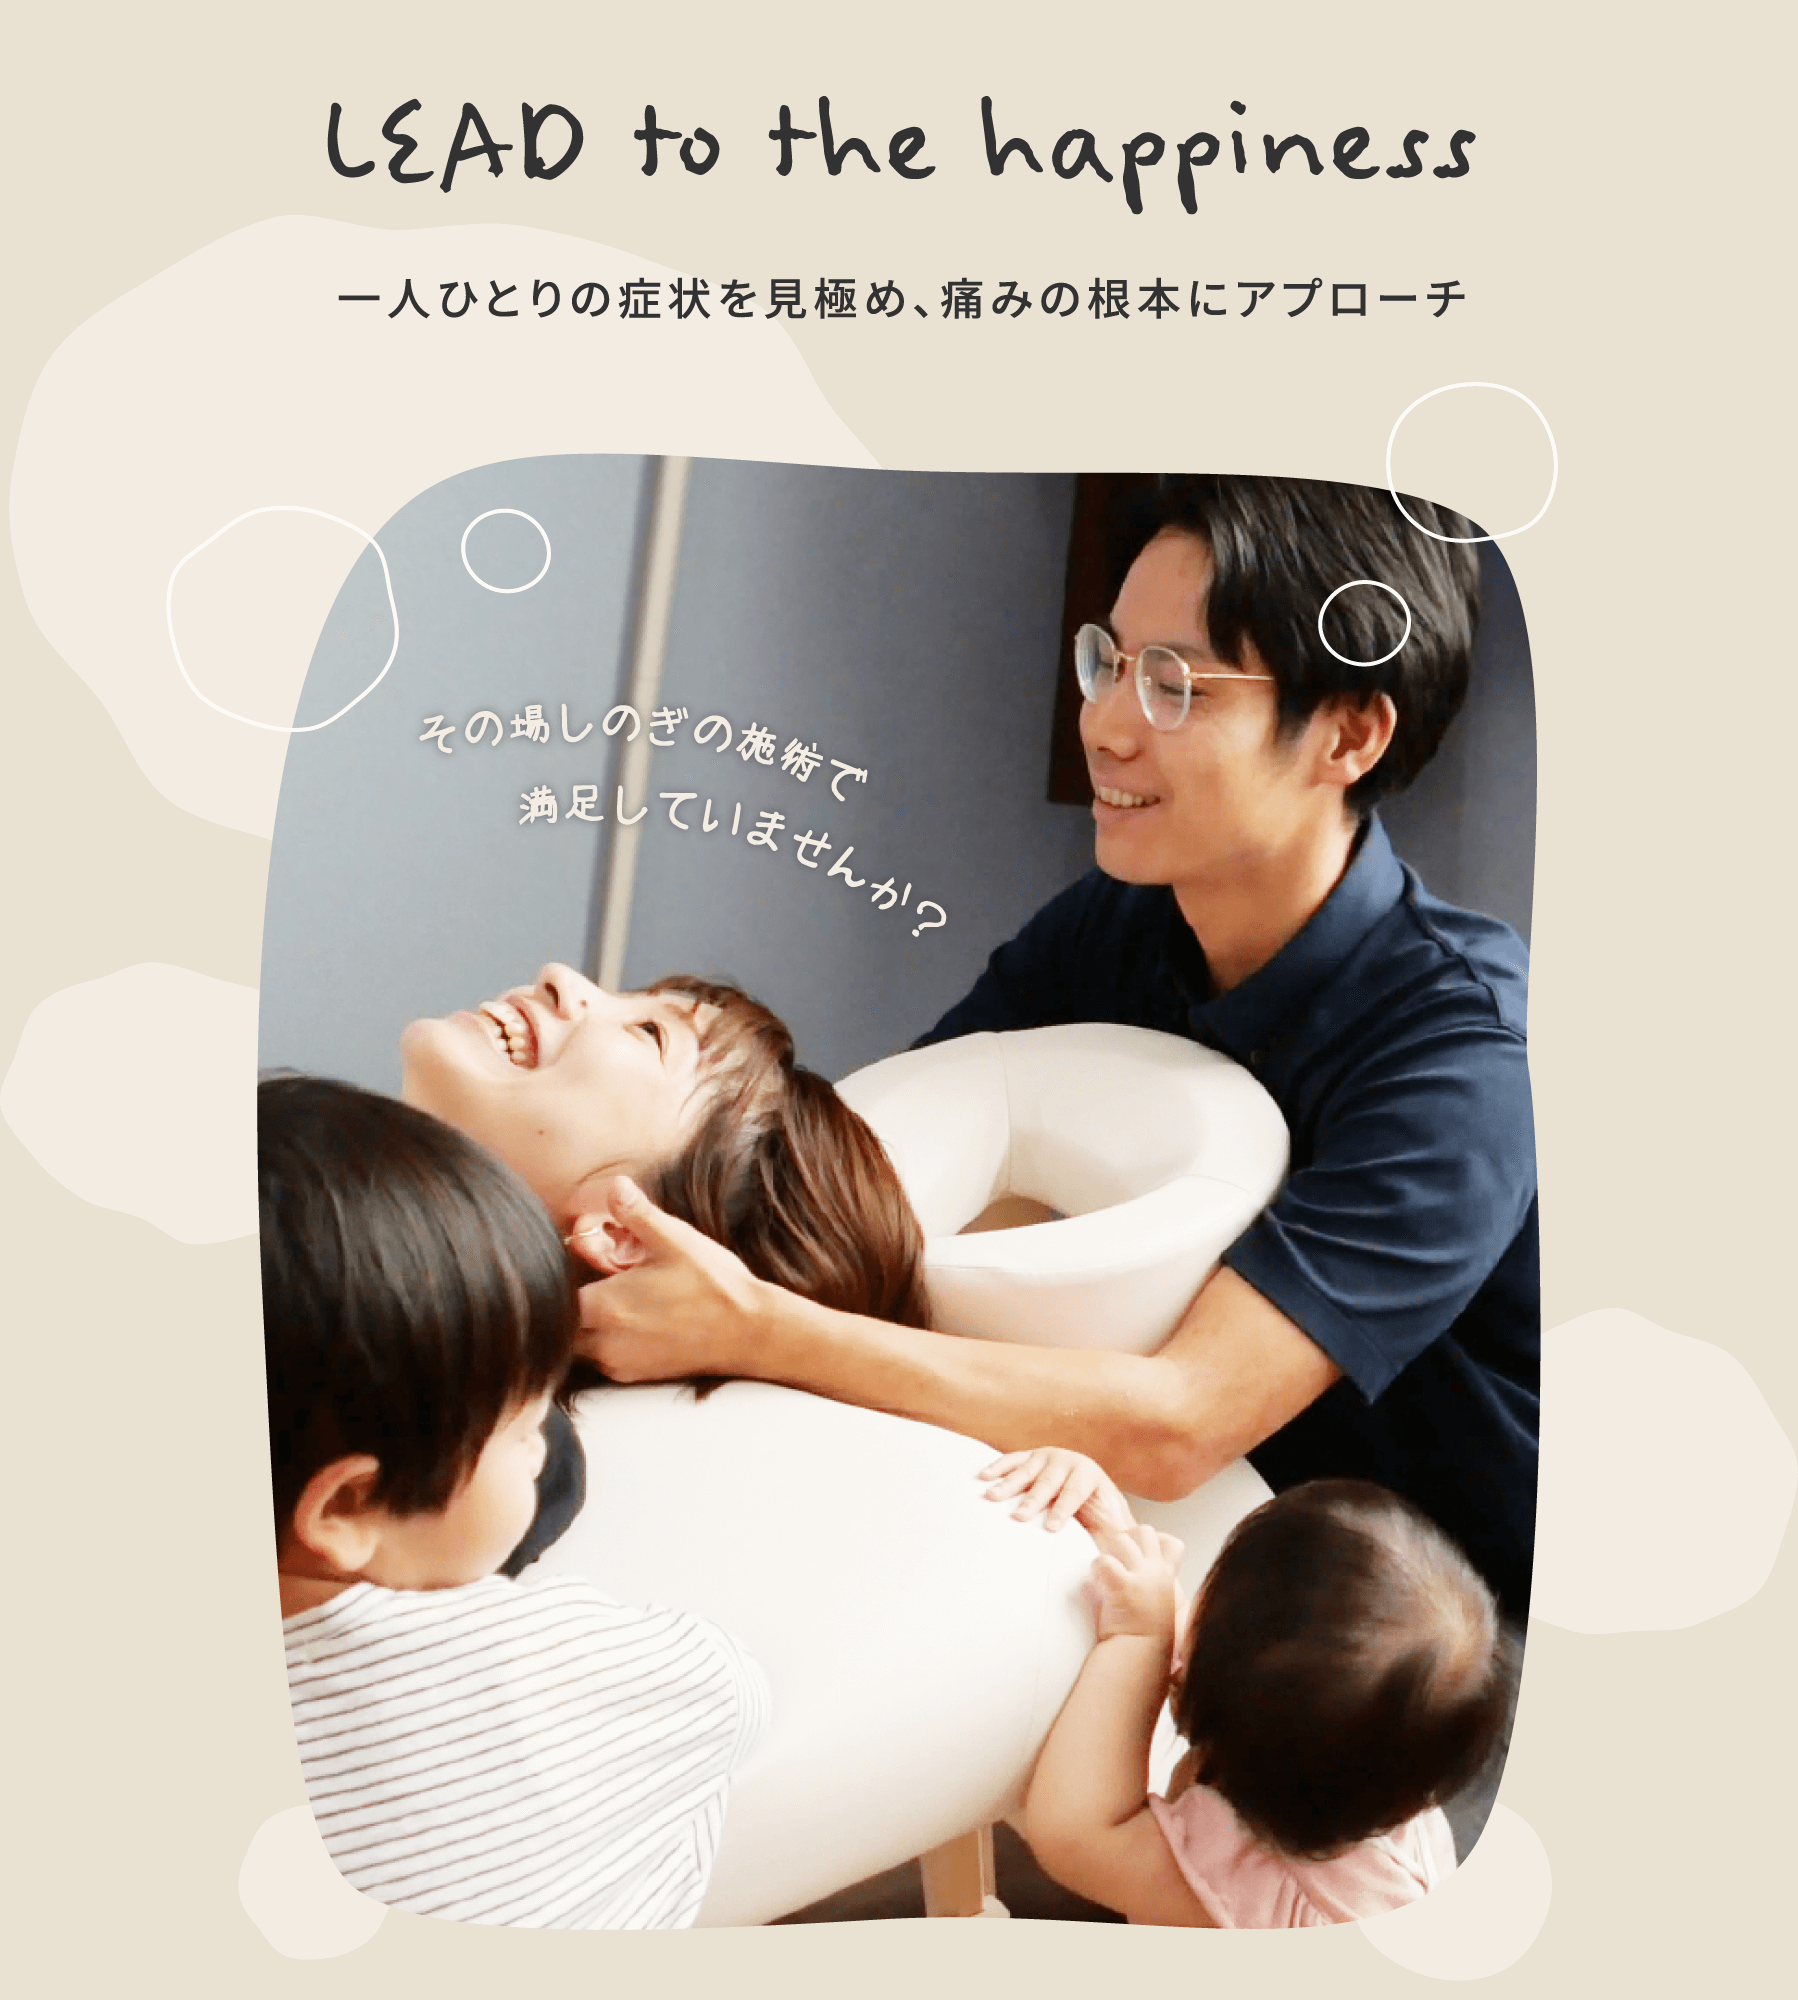 LEAD to the happiness 一人ひとりの症状を見極め、痛みの根本にアプローチ